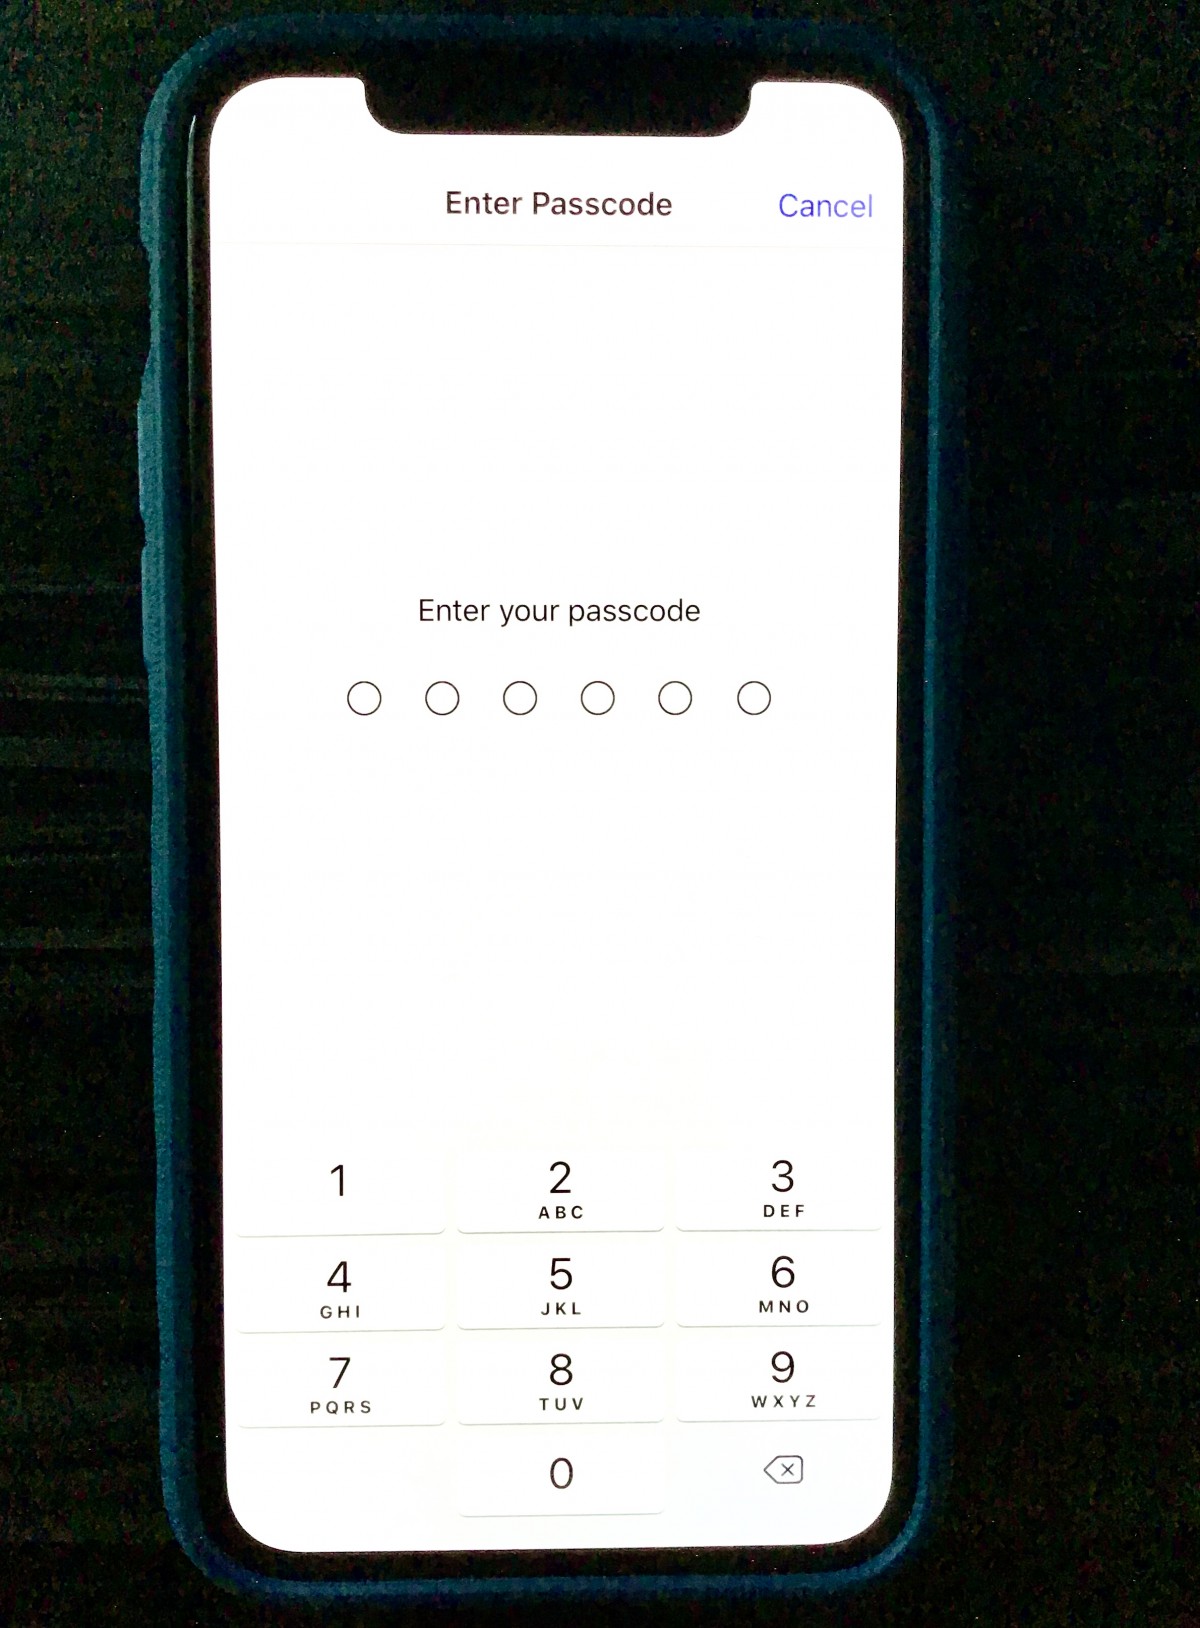 How to exit Guided Exit Access (to Exit/Close the app you’re locked in)